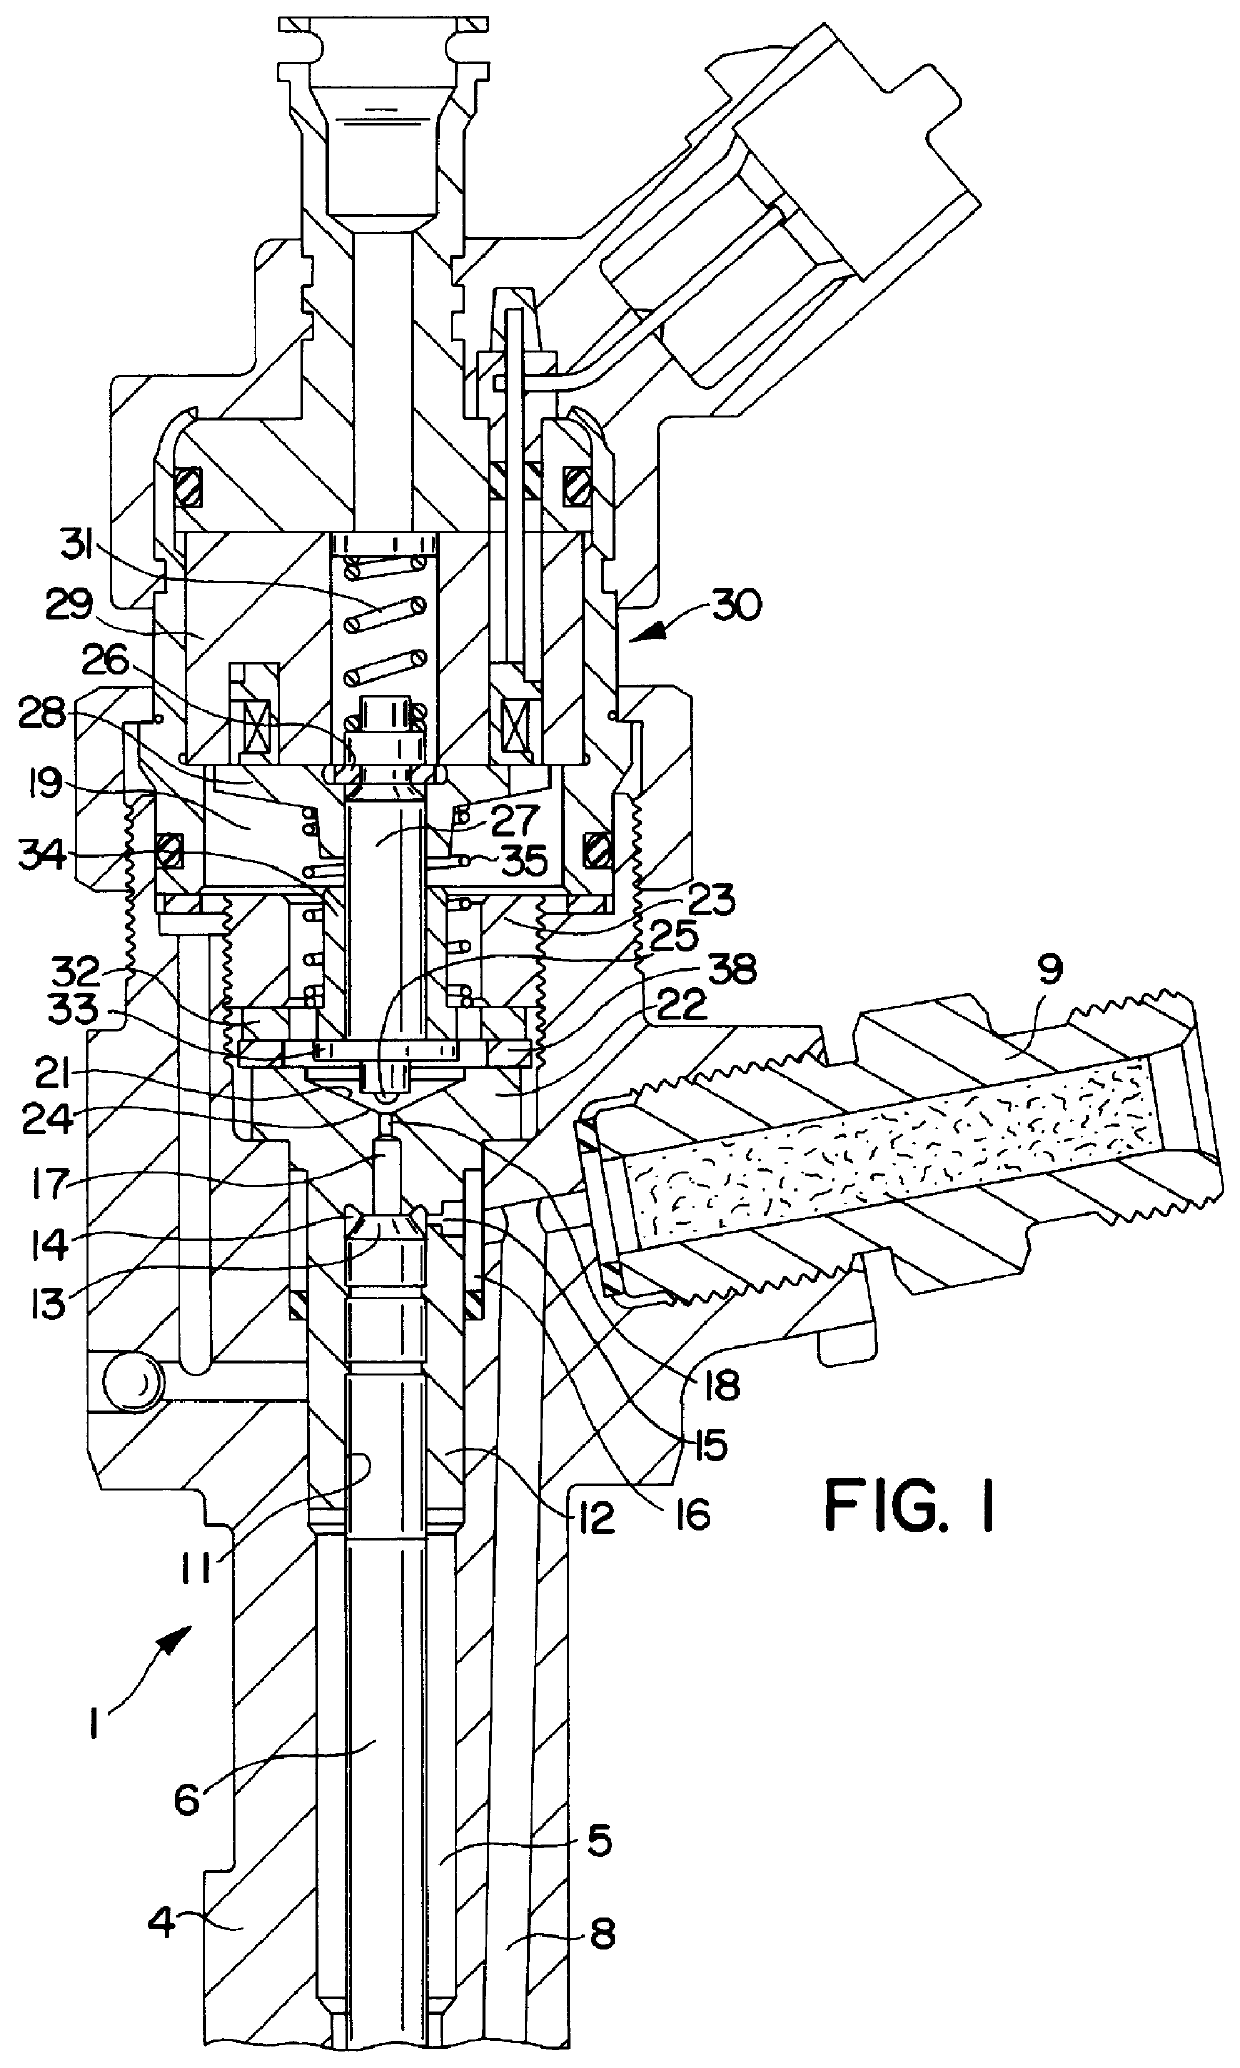 Solenoid valve for controlling an electrically controlled fuel ignition valve